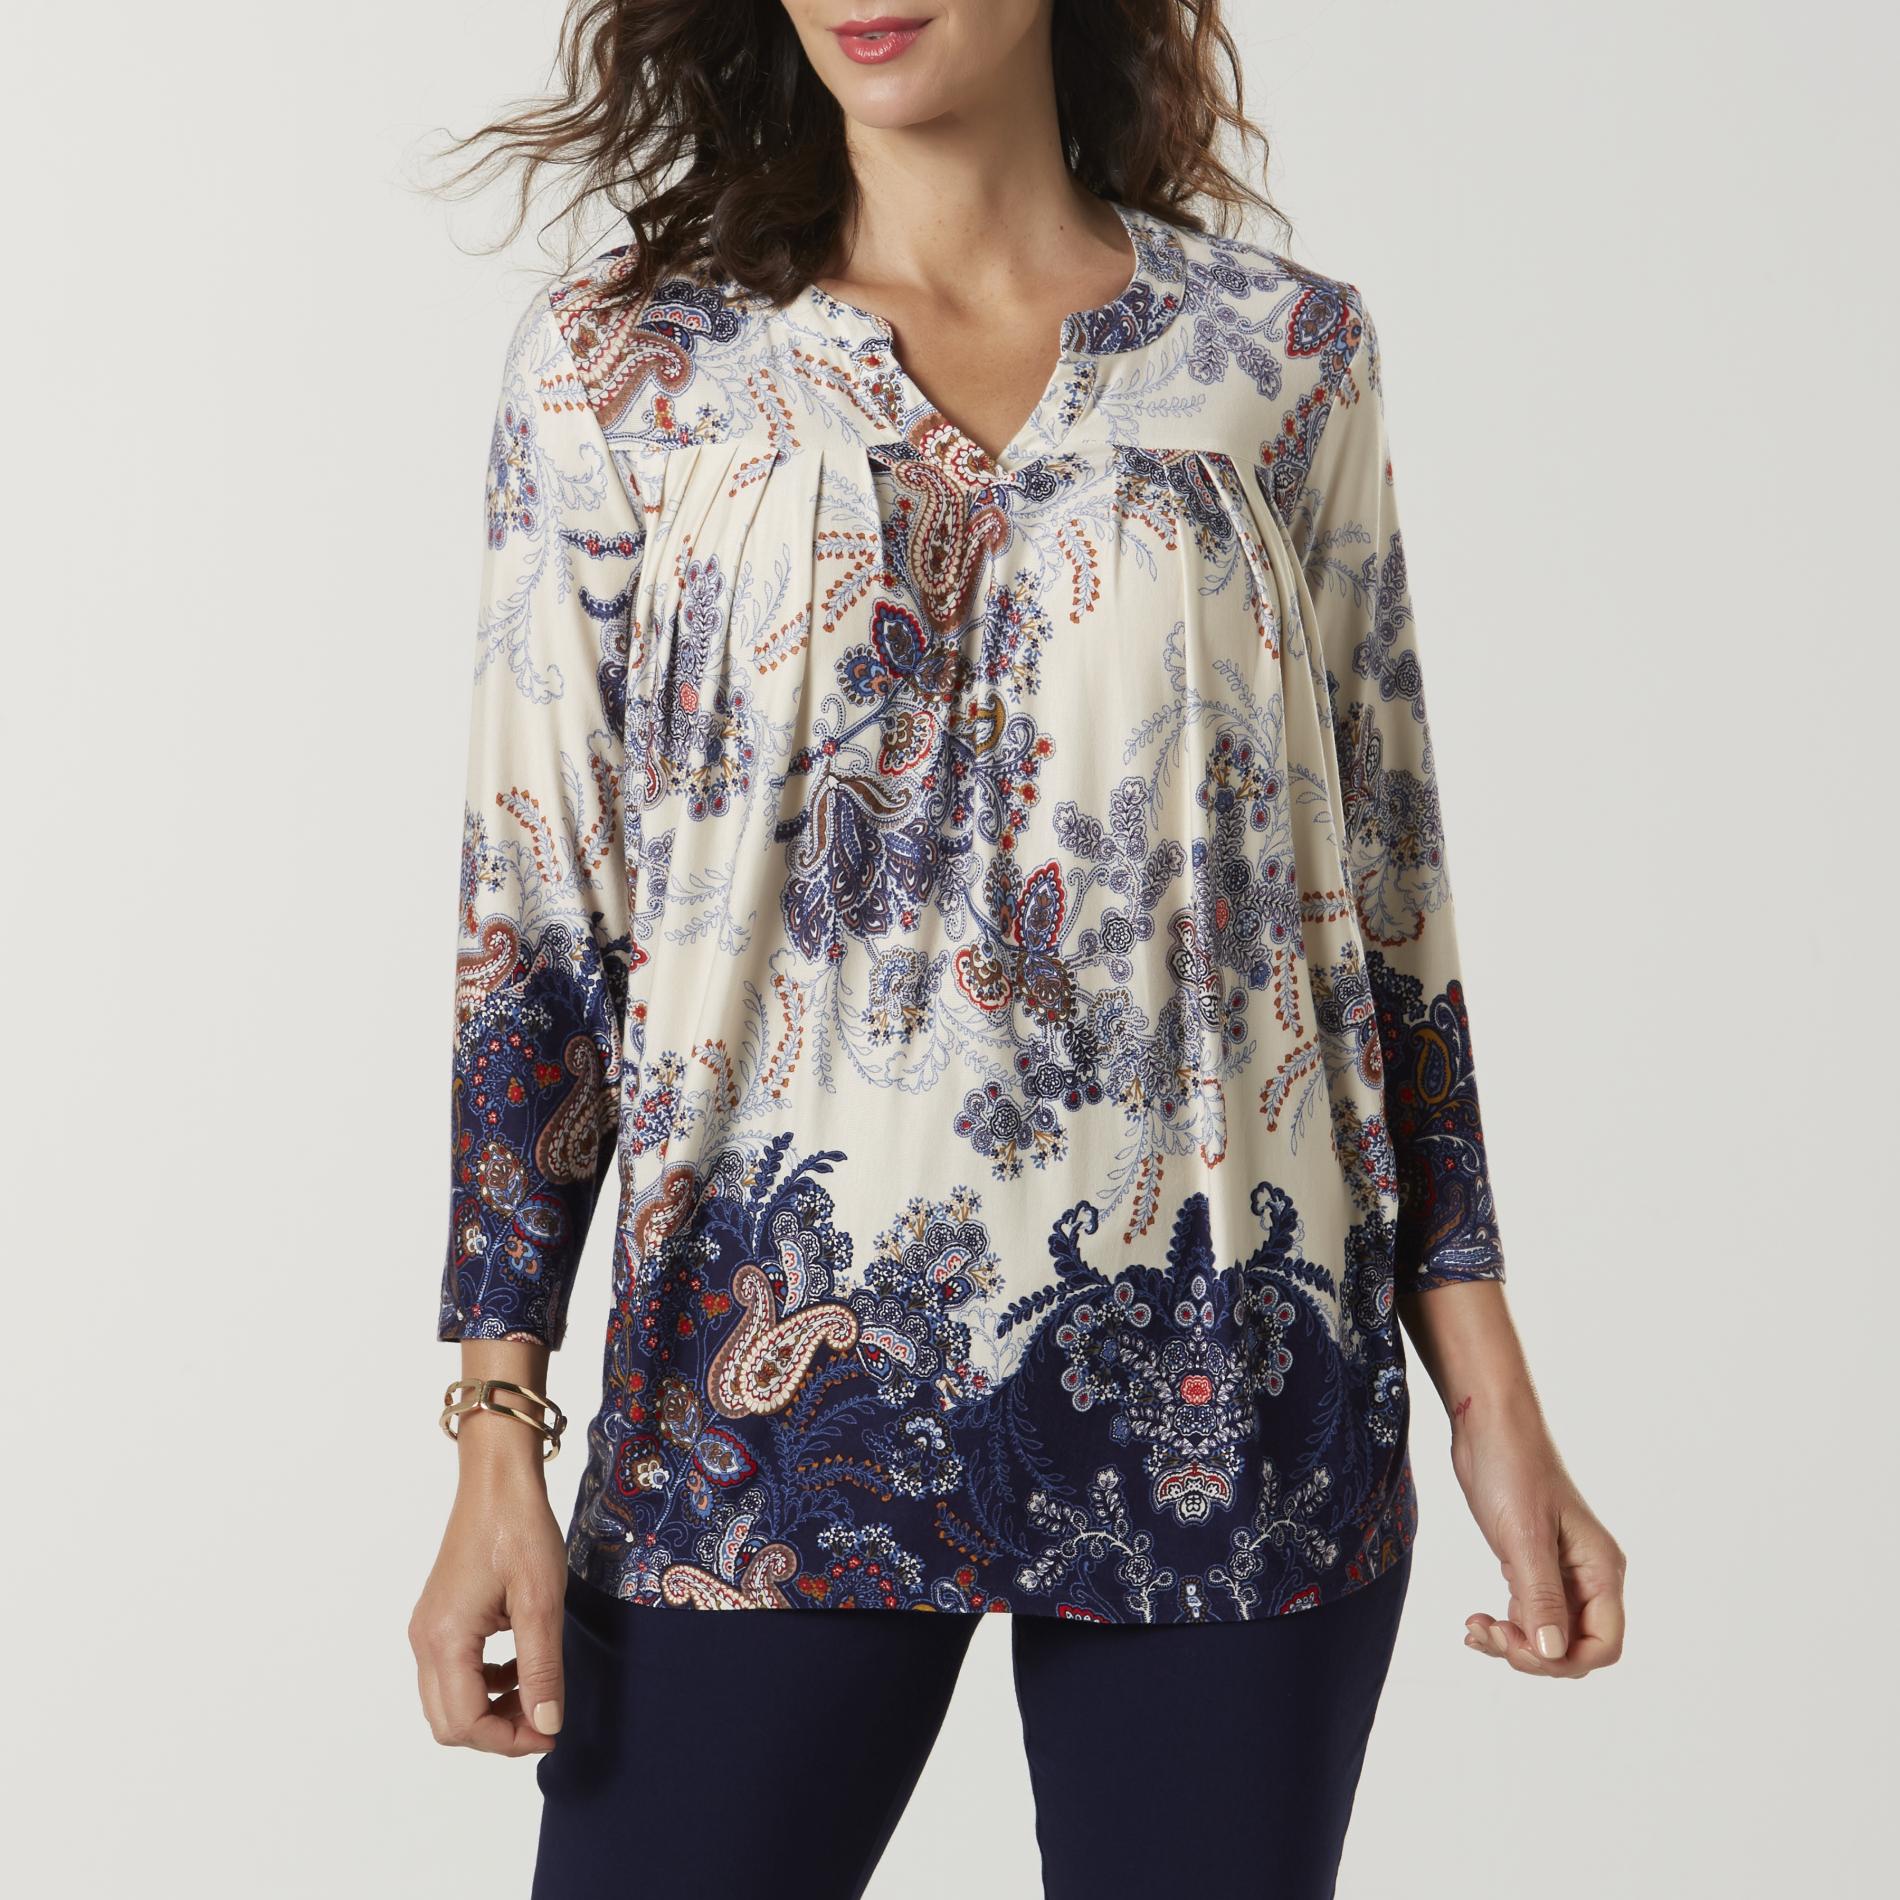 Basic Editions Women's Peasant Top - Paisley